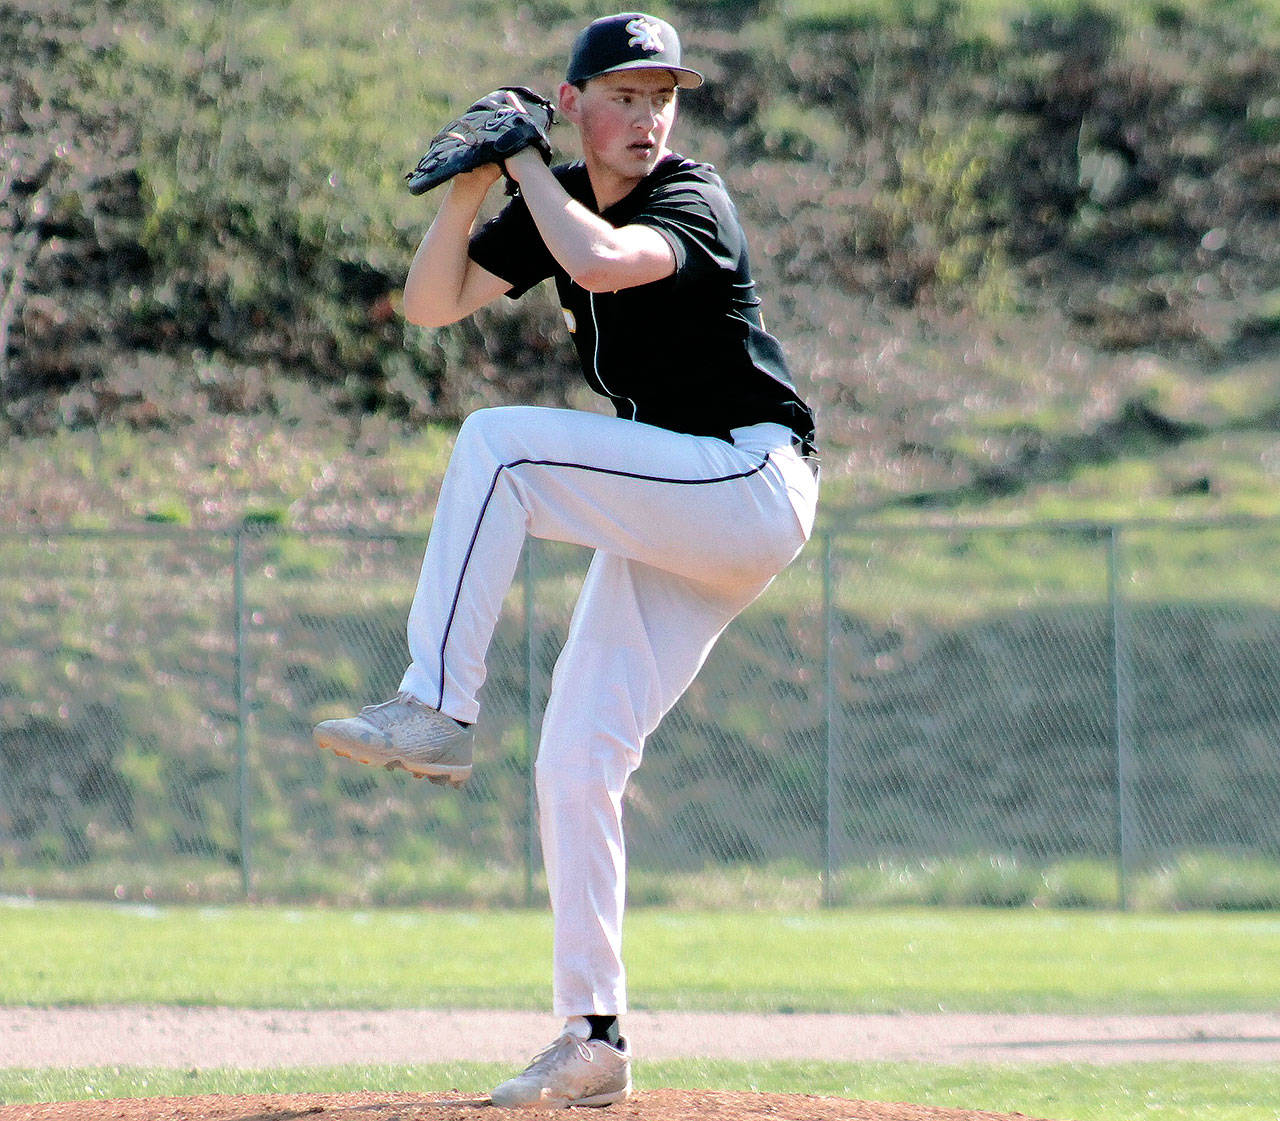 South Kitsap senior Tim Reidy would have anchored one of the best pitching staffs in the SPSL this season. (Mark Krulish/Kitsap News Group)